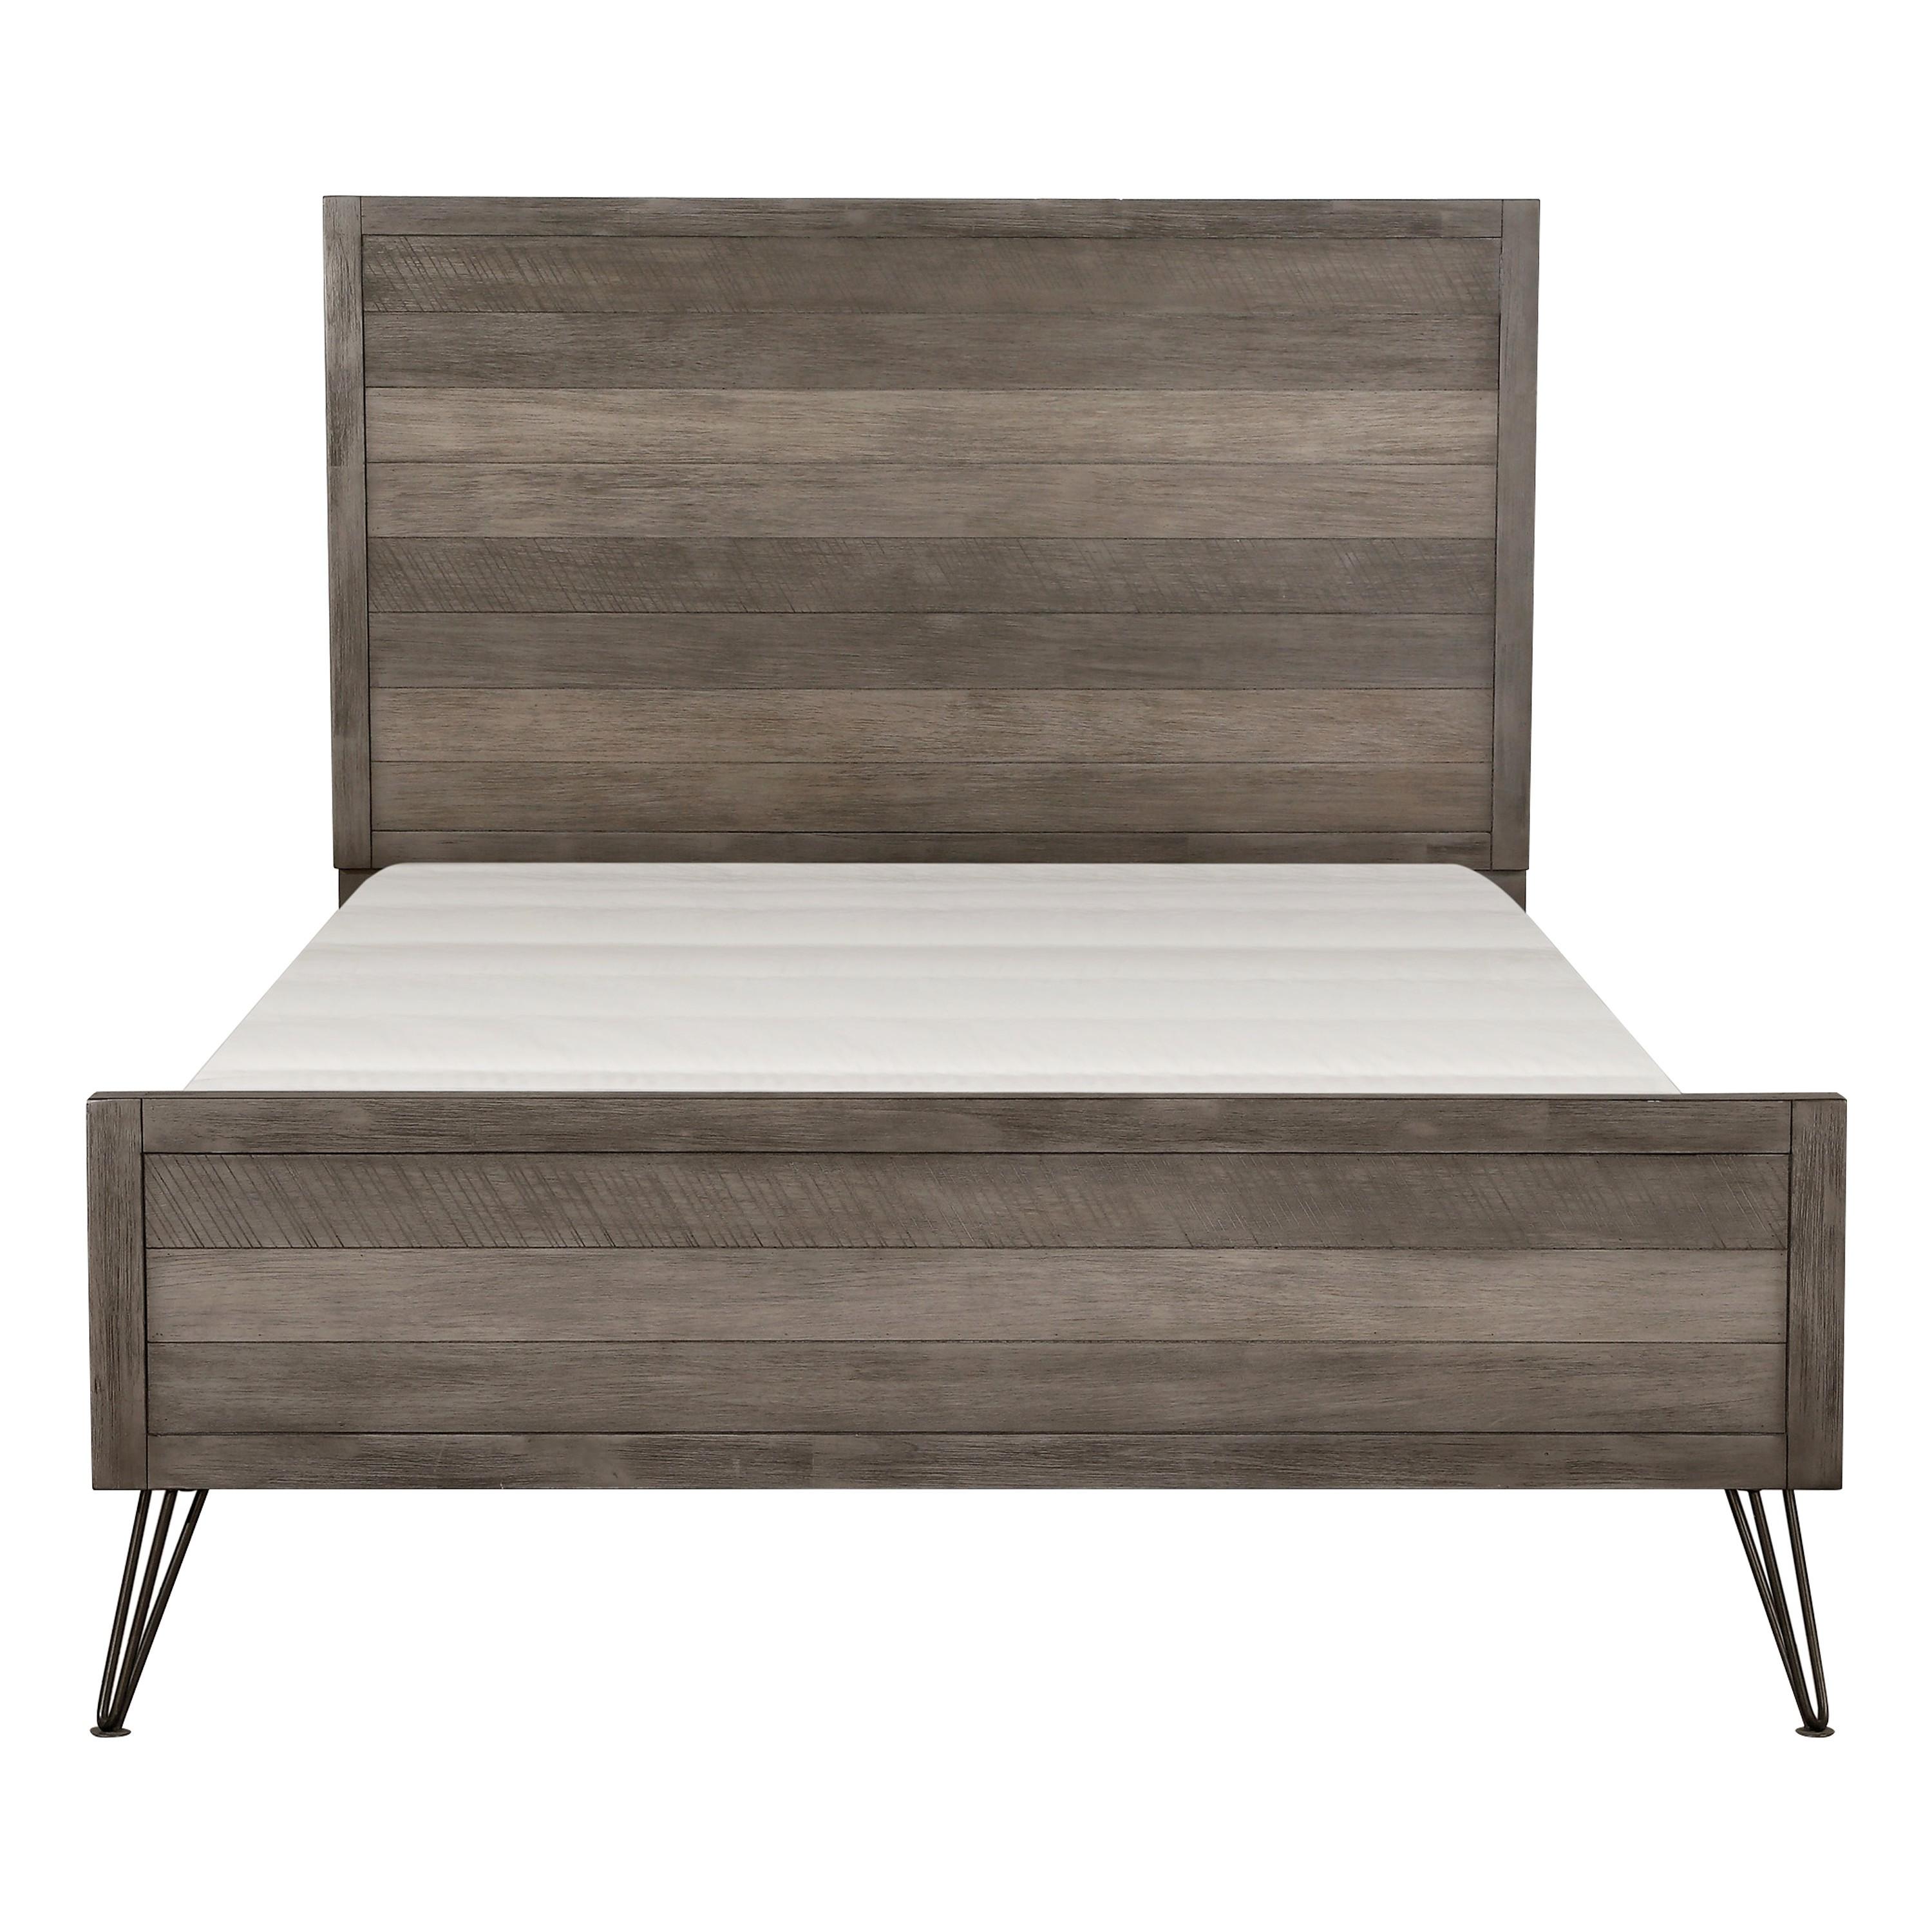 

    
Contemporary 3-Tone Gray Wood Queen Bed Homelegance 1604-1* Urbanite
